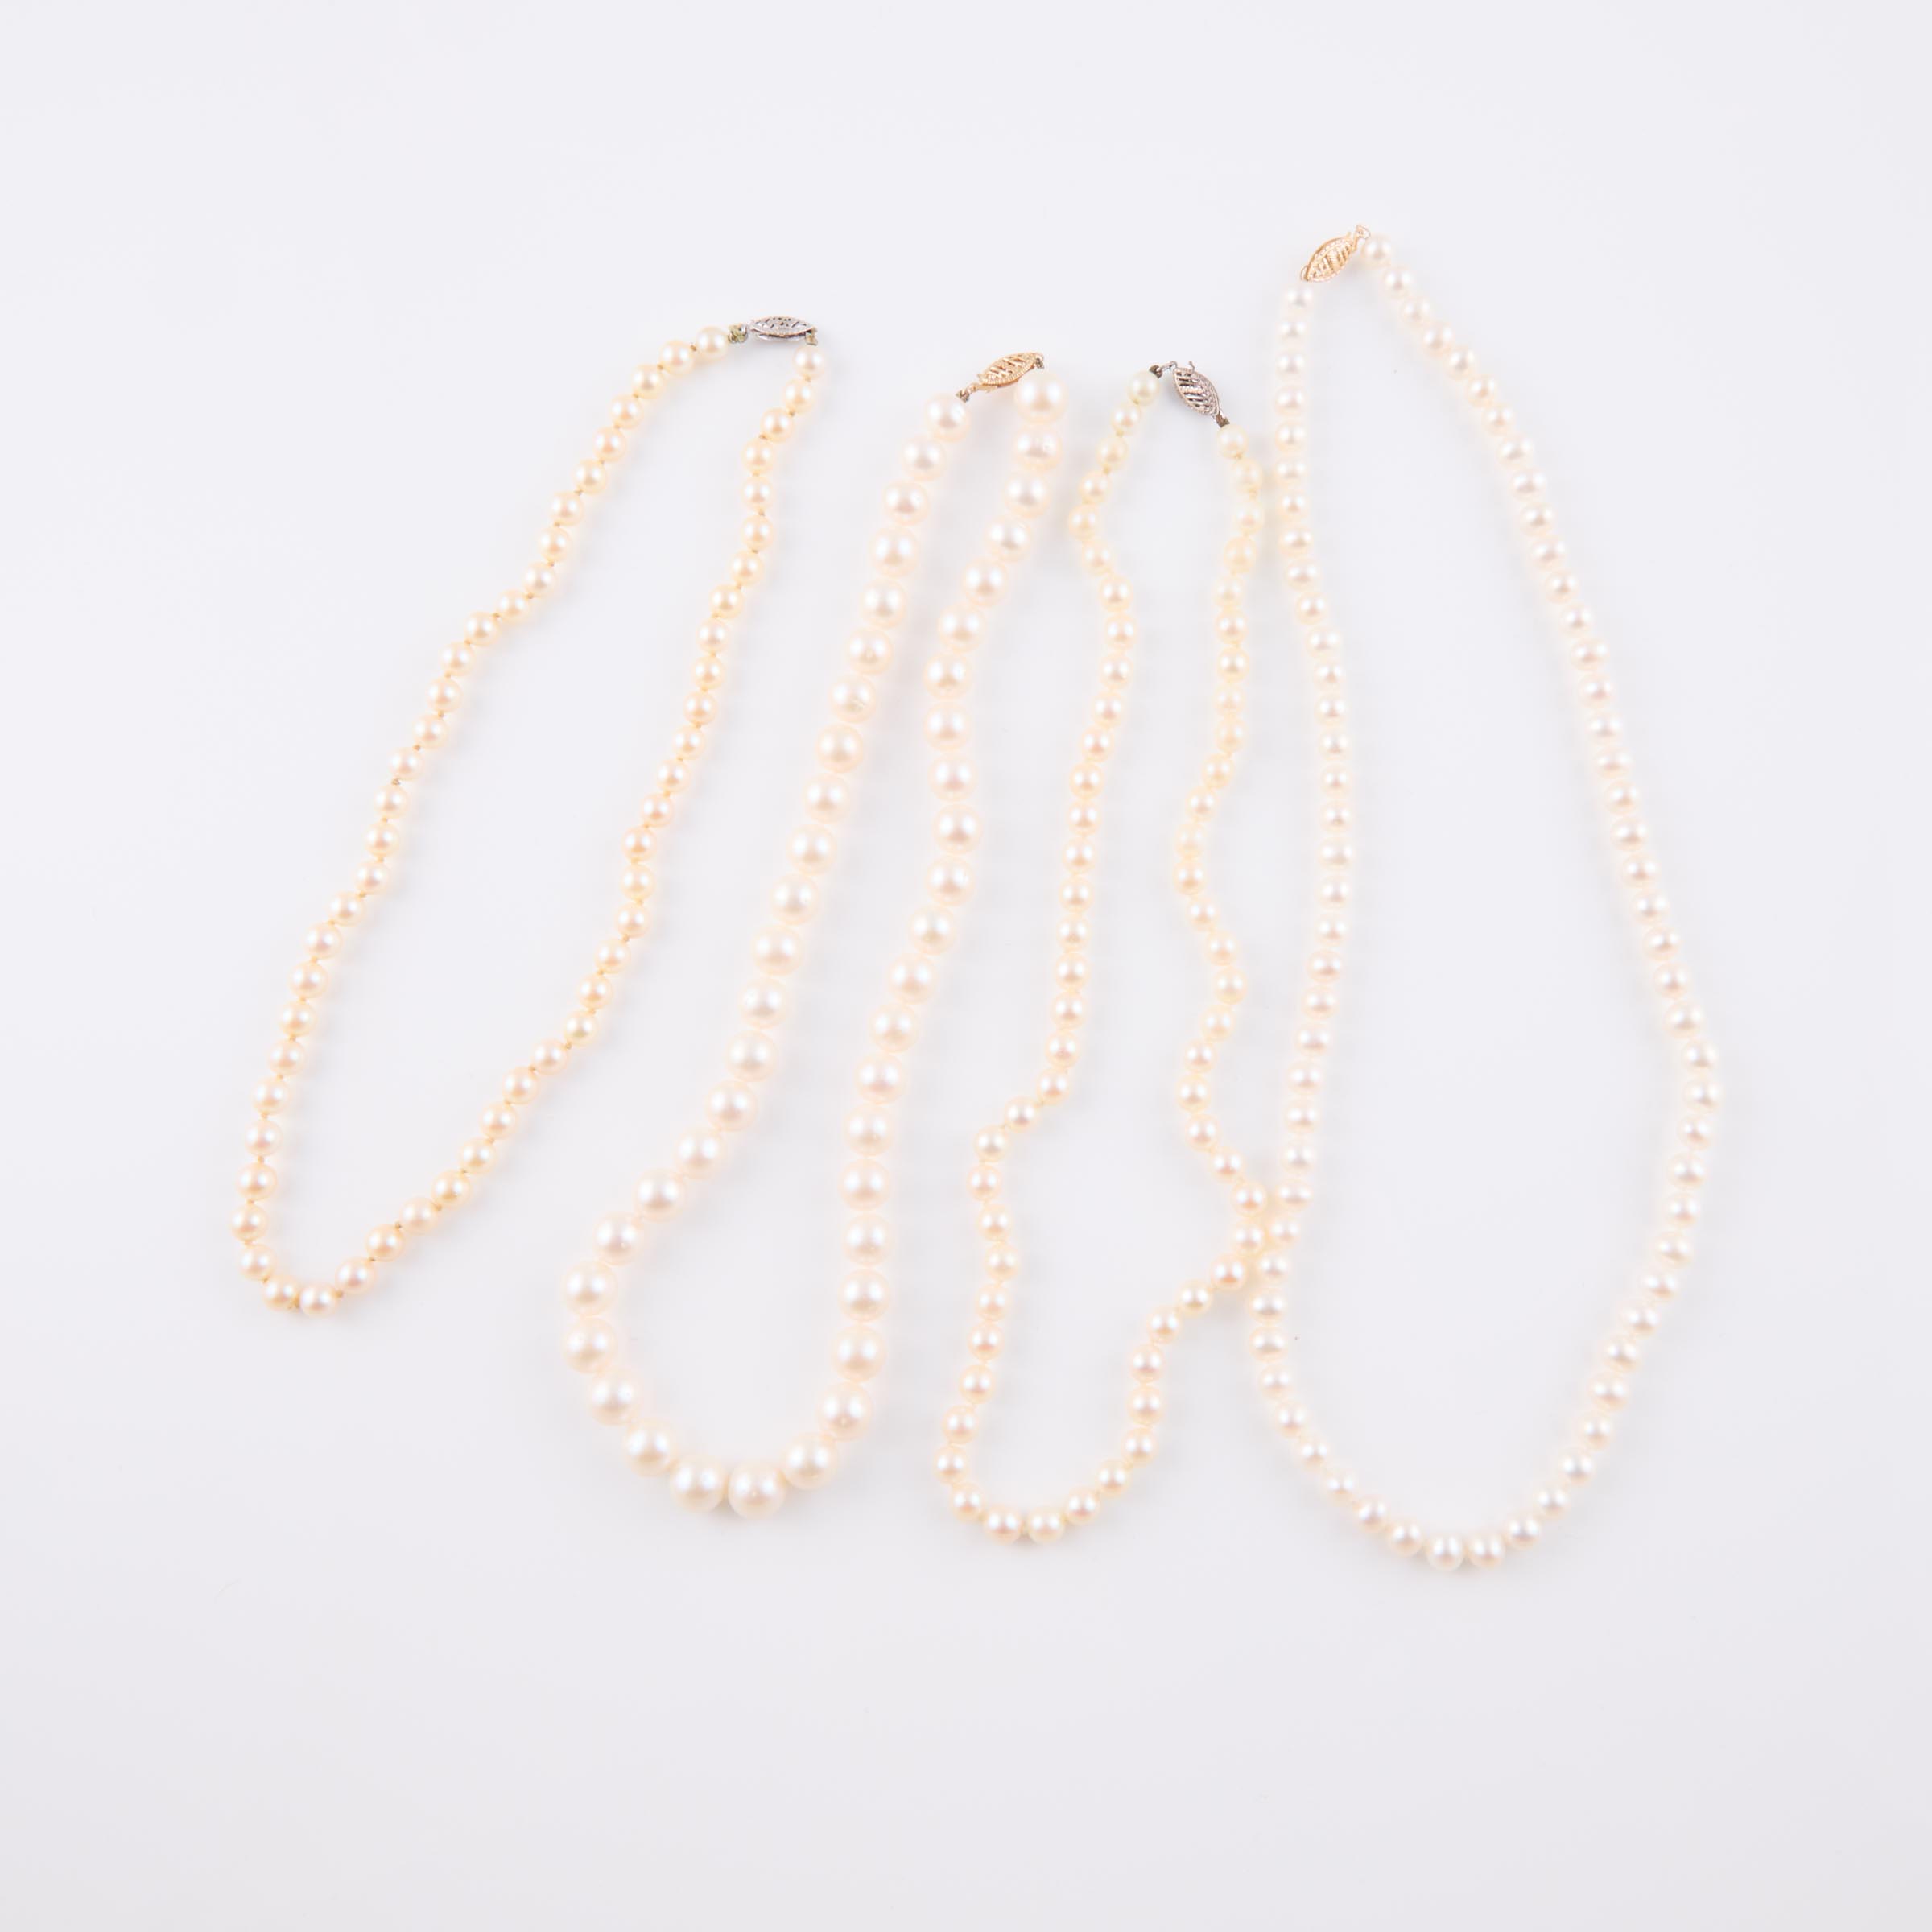 Four Single Strand Freshwater And Cultured Pearl Necklaces